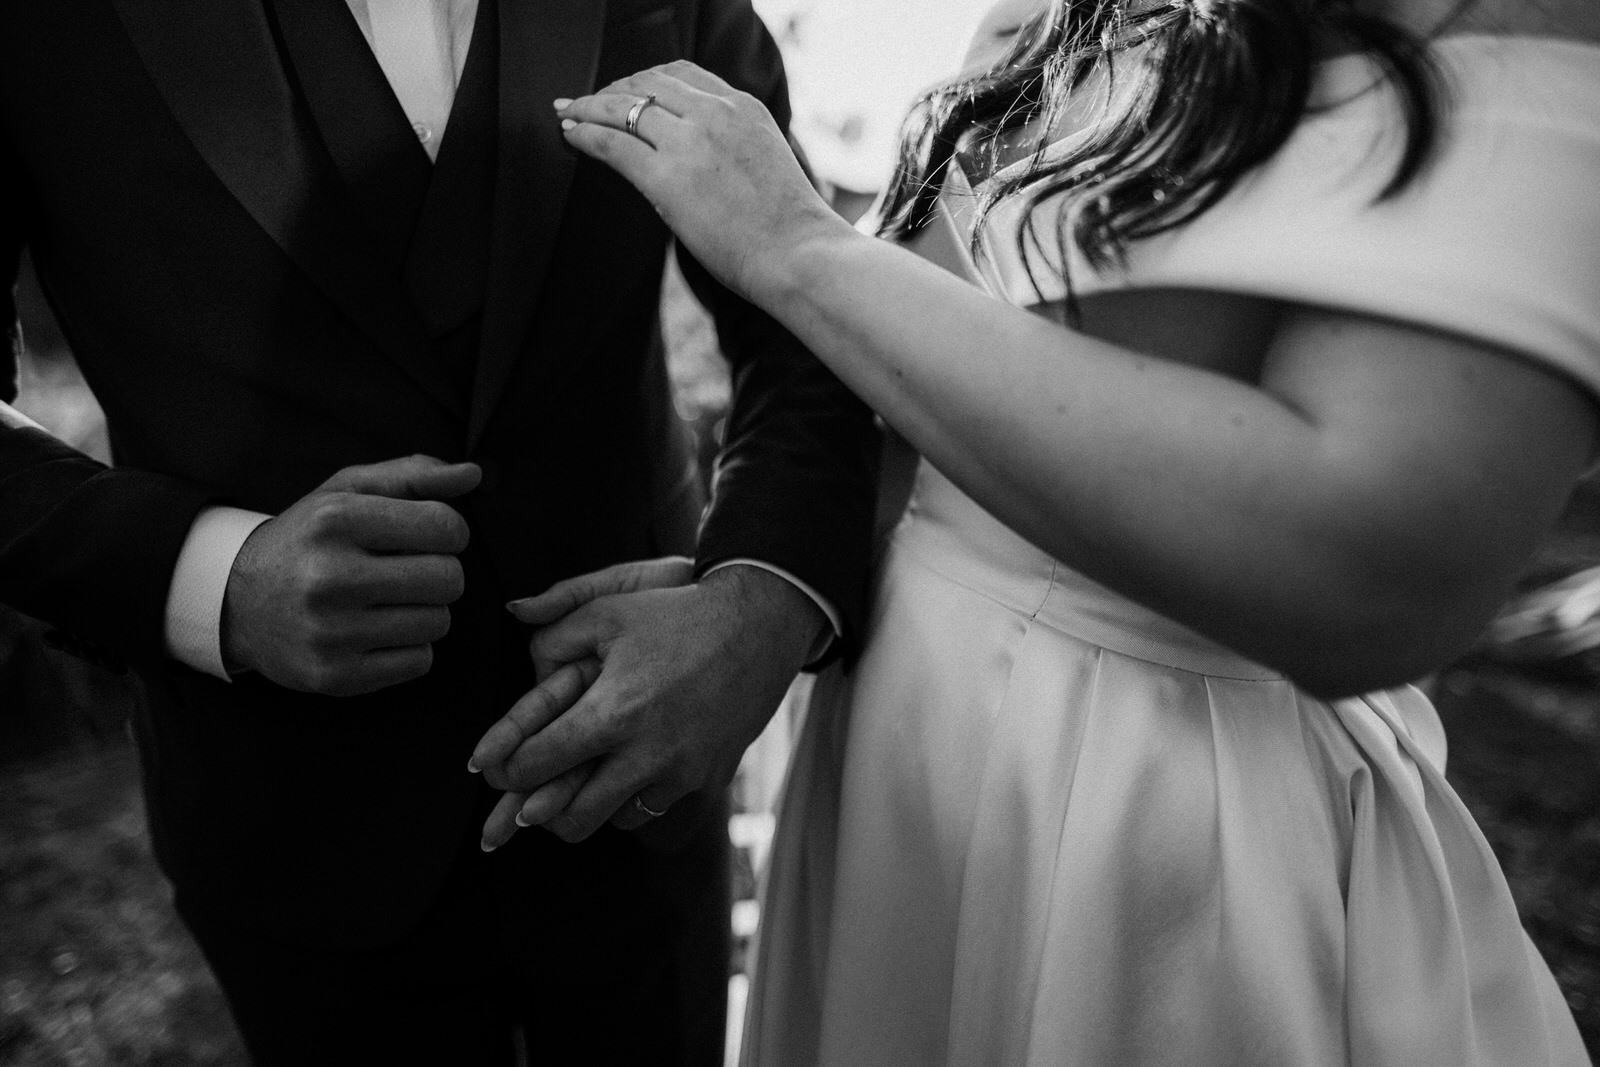 a spontaneous photo of hands holding at a wedding